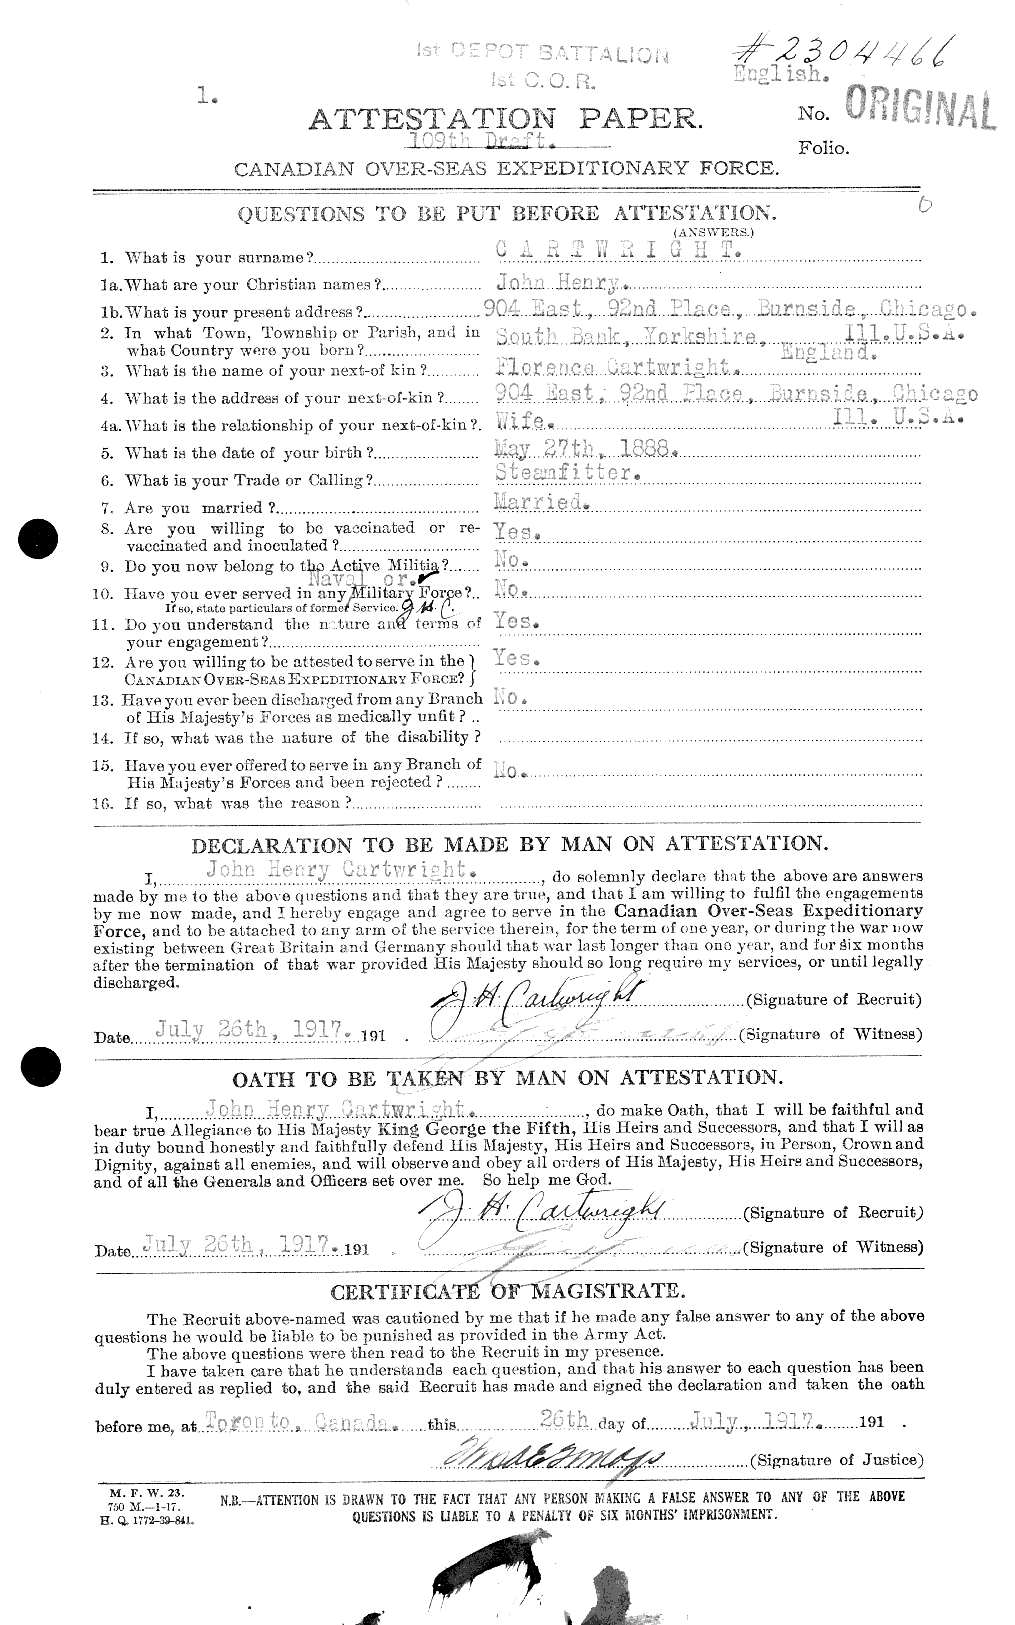 Personnel Records of the First World War - CEF 011602a